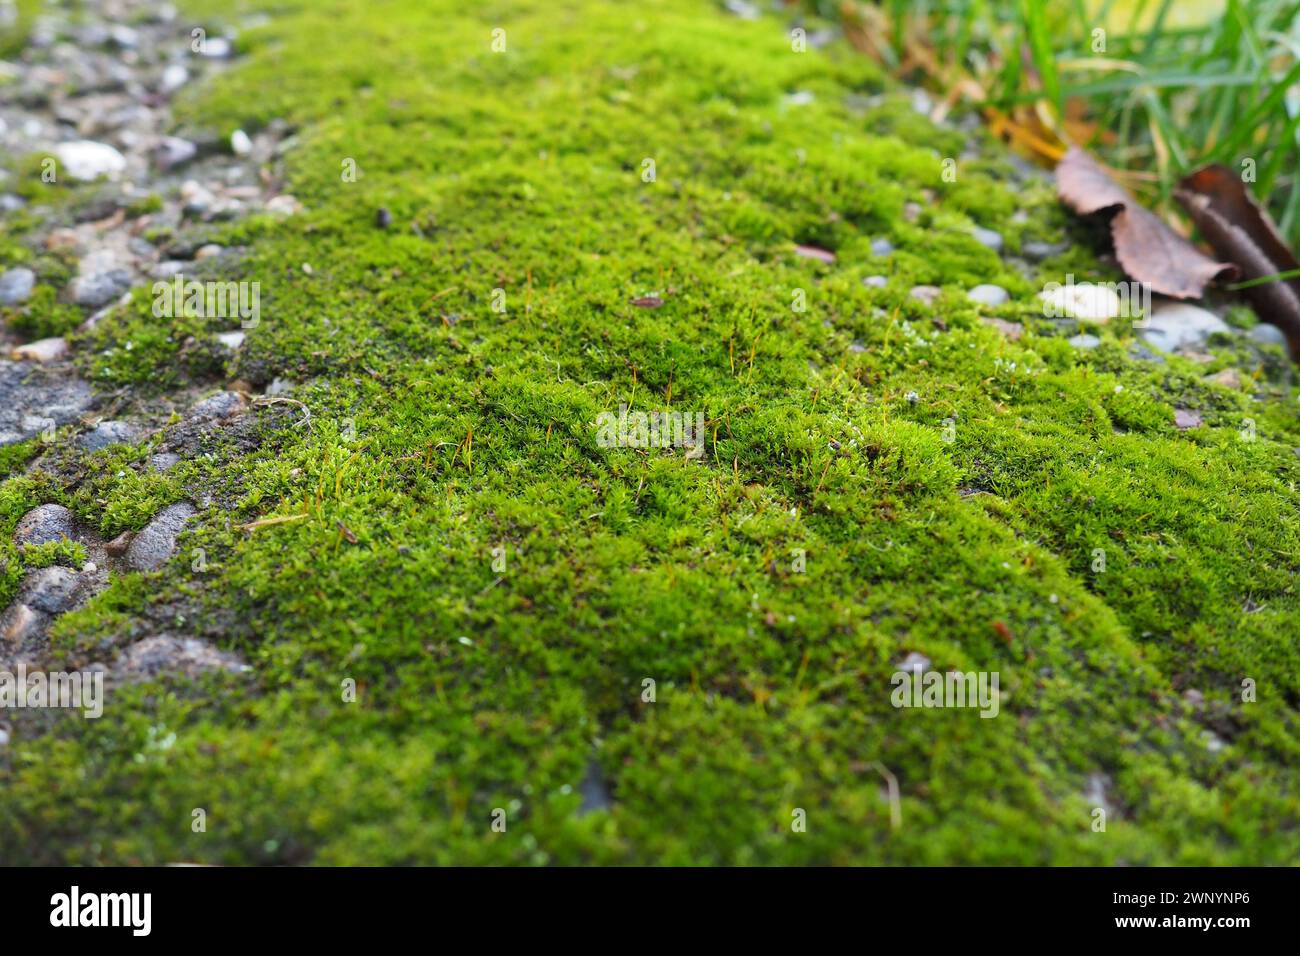 Mossy higher plants or bryophytes. The theme of bryology, the science of mosses. Damp concrete covered with a bright green moss carpet. Beautiful Stock Photo